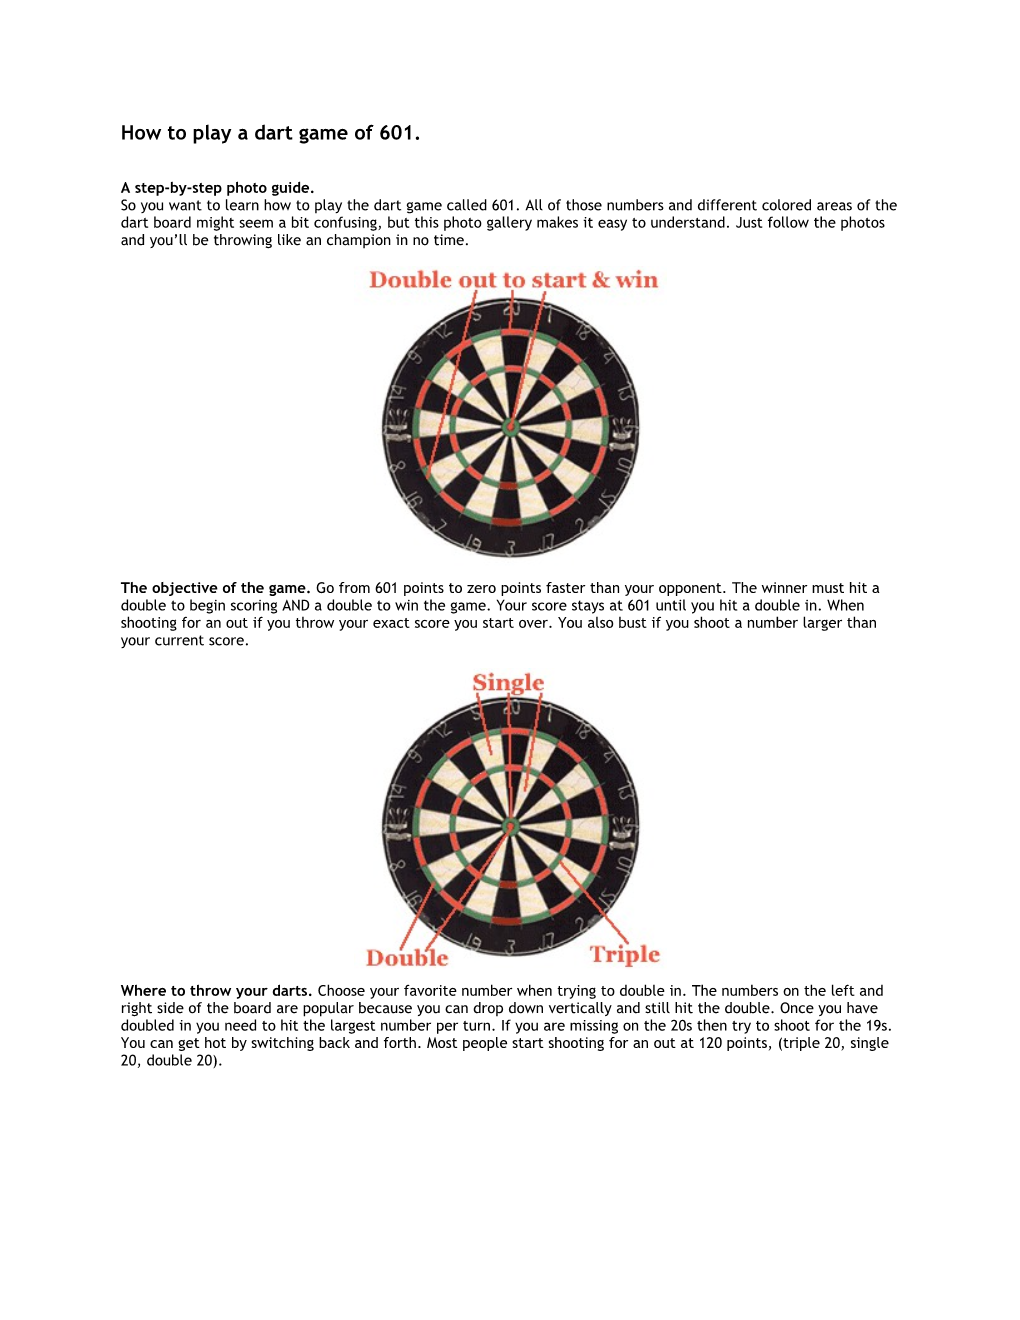 How to Play a Dart Game of 601